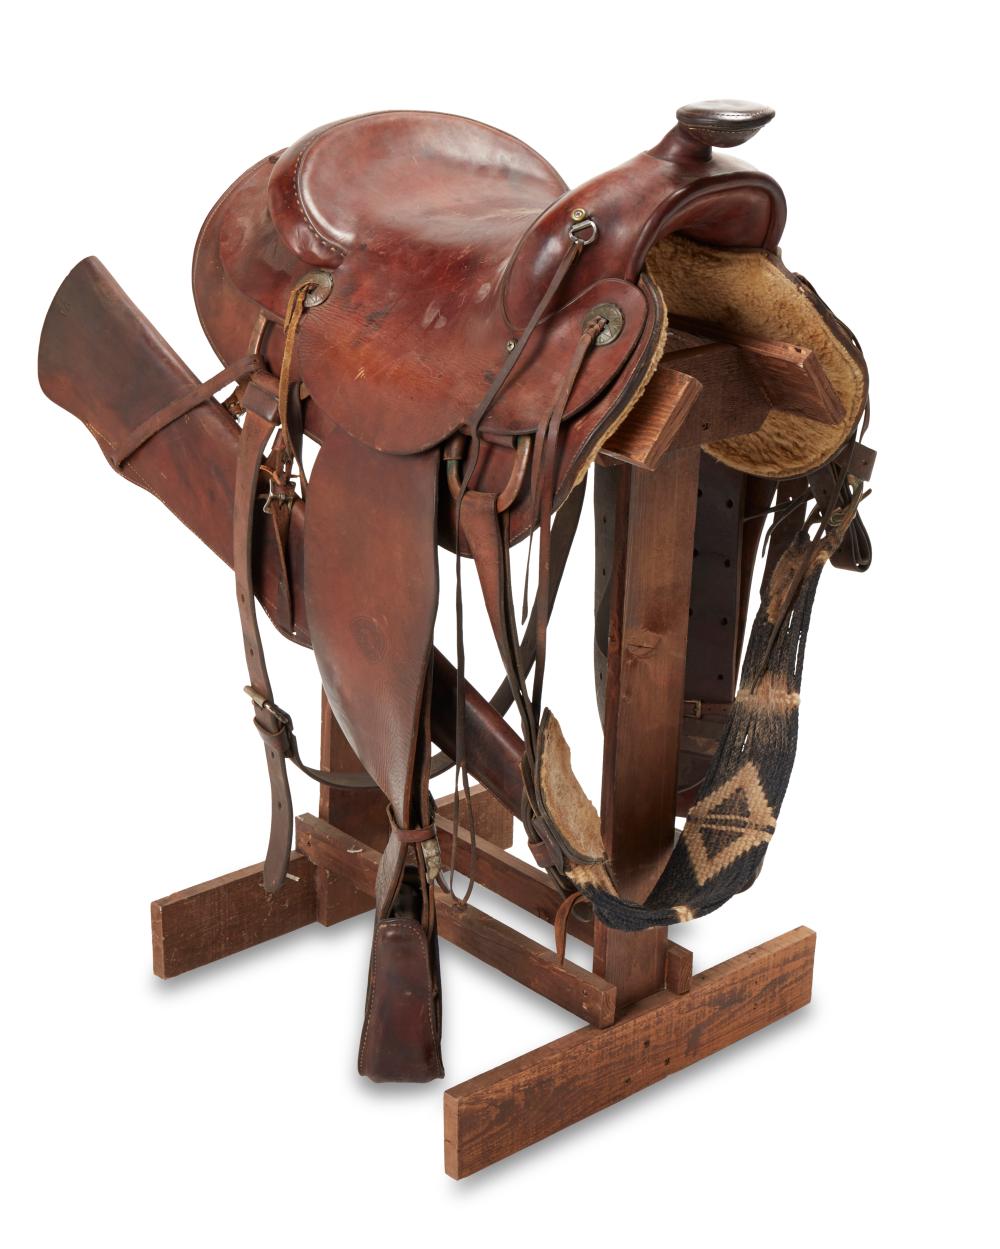 A HEREFORD SADDLE FROM 26 BAR RANCHA 2ee42d